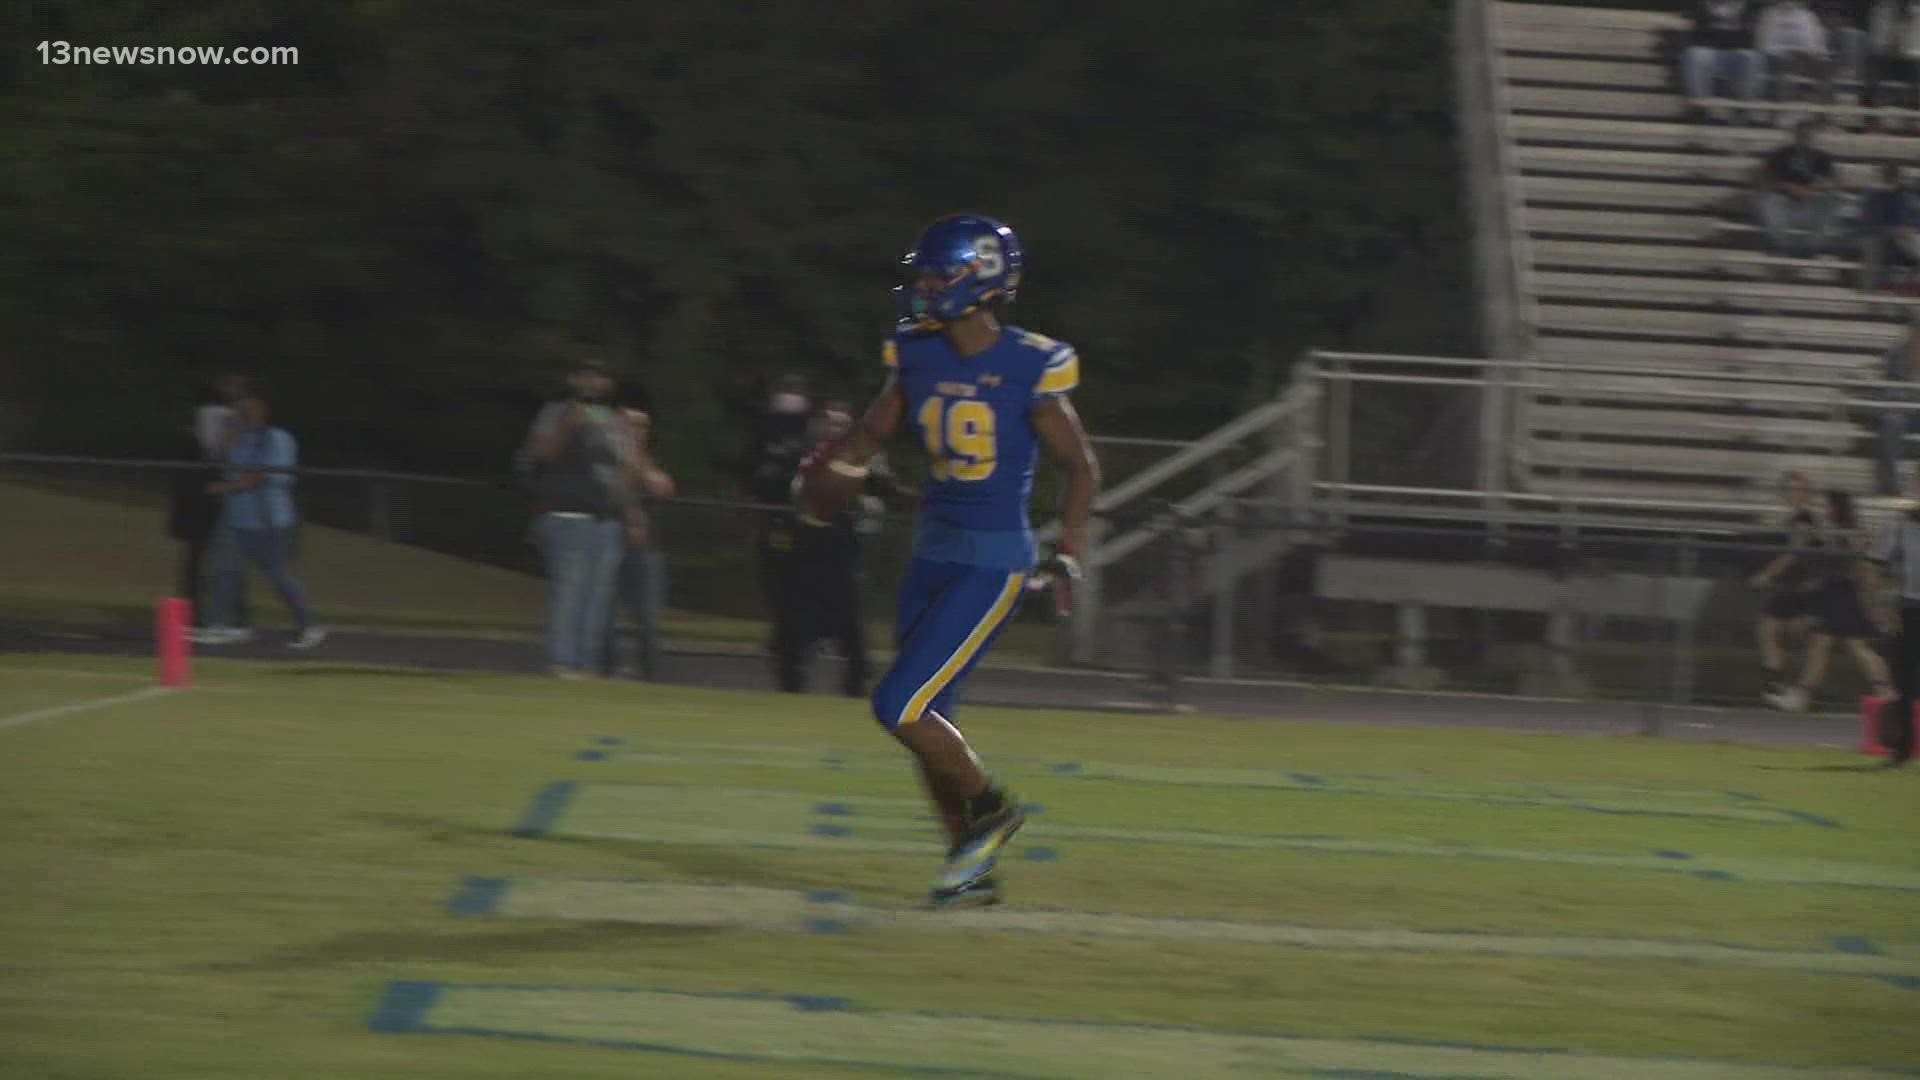 Ethan Vasko tossed five touchdowns as Oscar Smith handed King's Fork its first loss of the season winning 49-7 on Friday night.